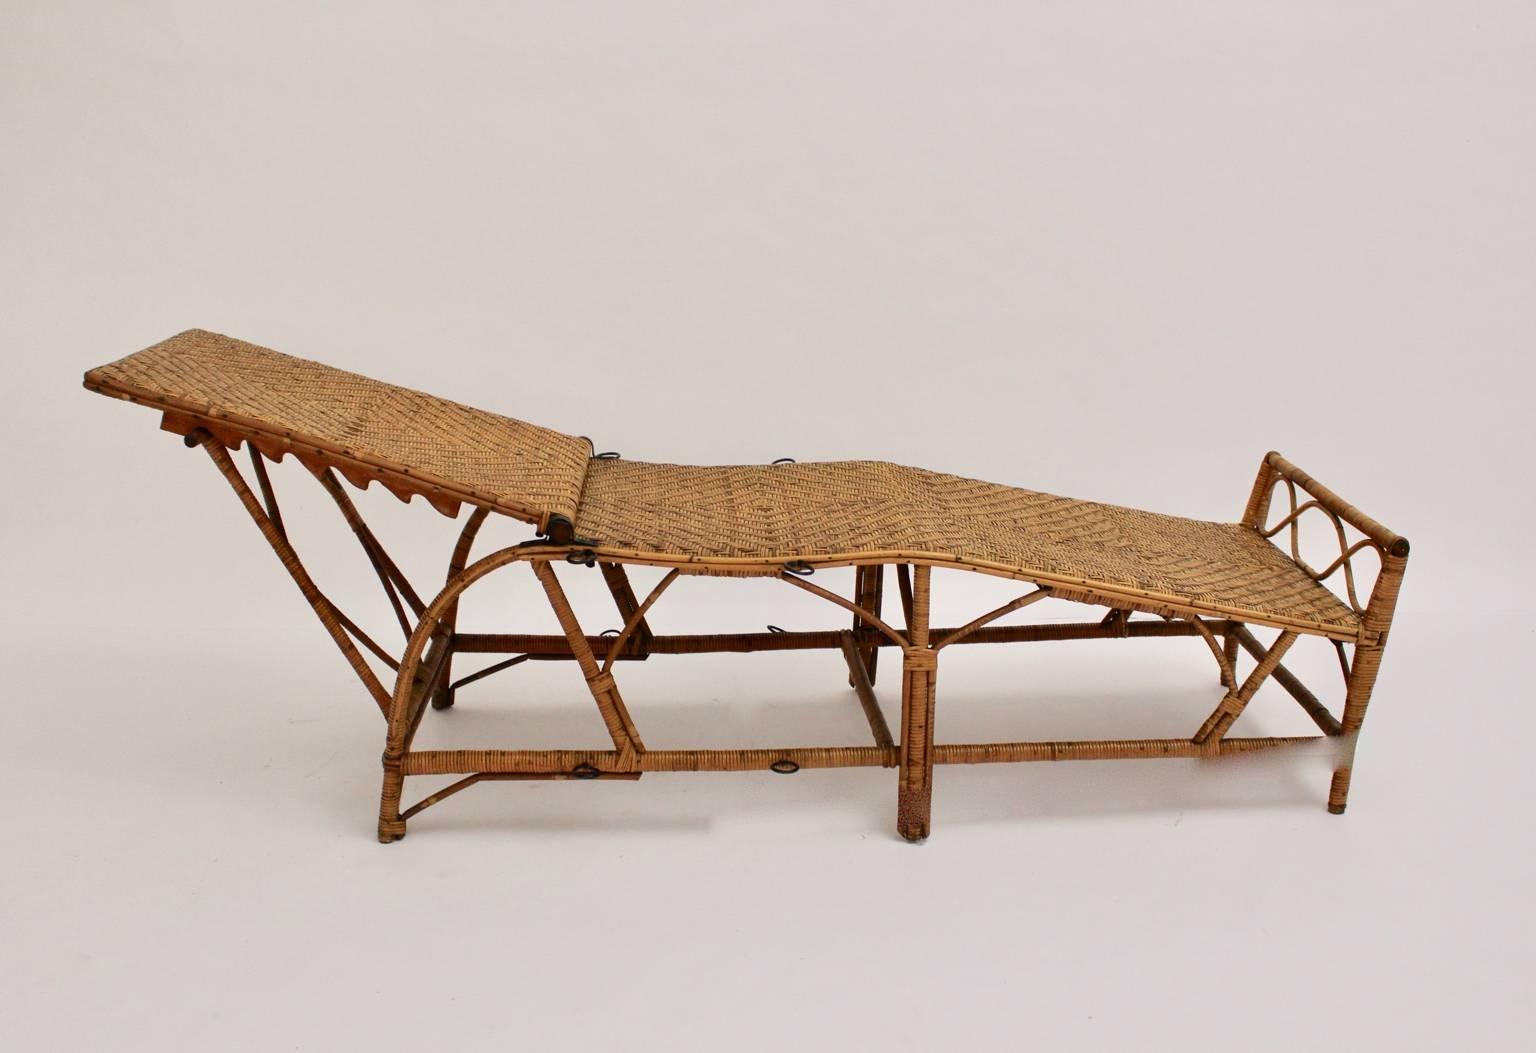 Rattan Art Deco Vintage Chaise Longue by Perret & Vibert Attributed France 1920s For Sale 3